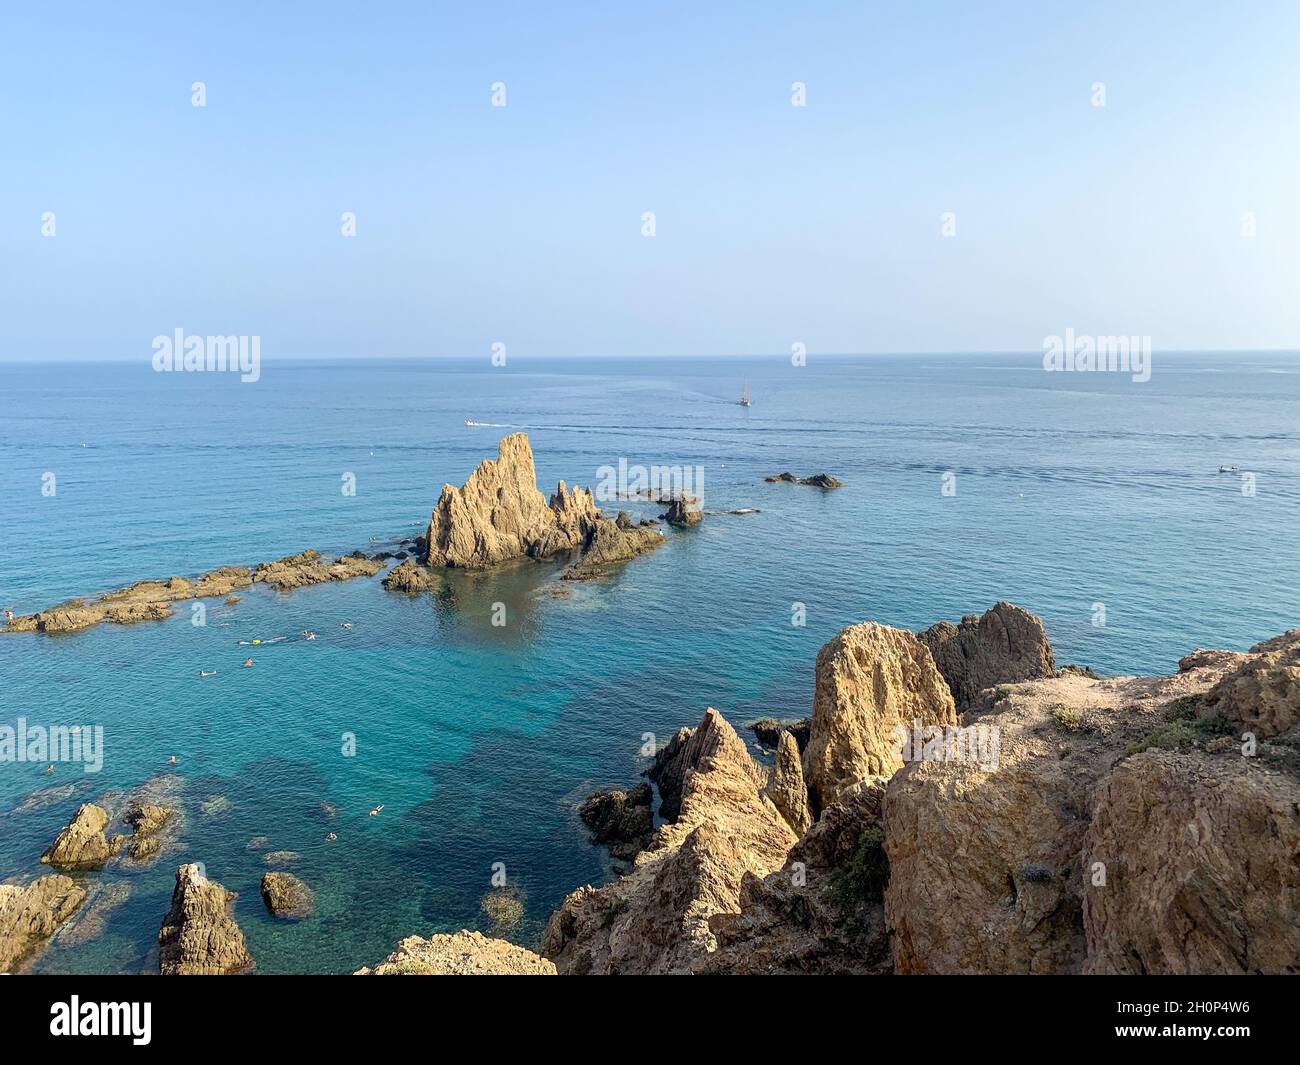 This reef that can be seen from the viewpoint of the sirens, next to the Cabo de Gata lighthouse, is one of the most emblematic and photographed views Stock Photo